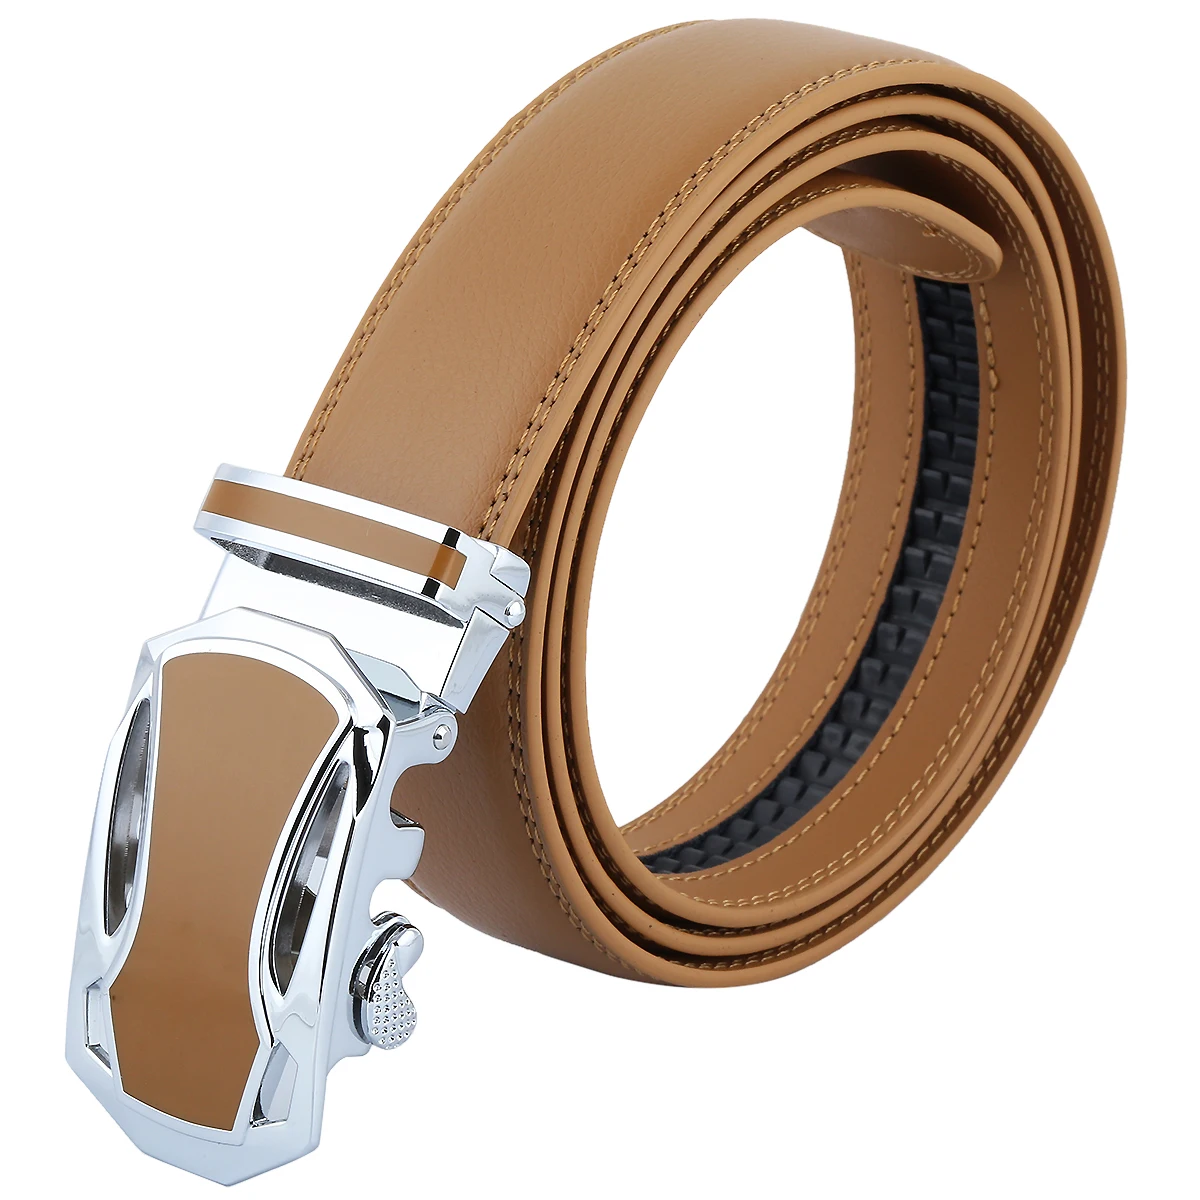 Fashion All-Match Genuine Leather Men's Belt Automatic Buckle Real Leather Belt Casual Male Belts For Jeans Business Cowboy